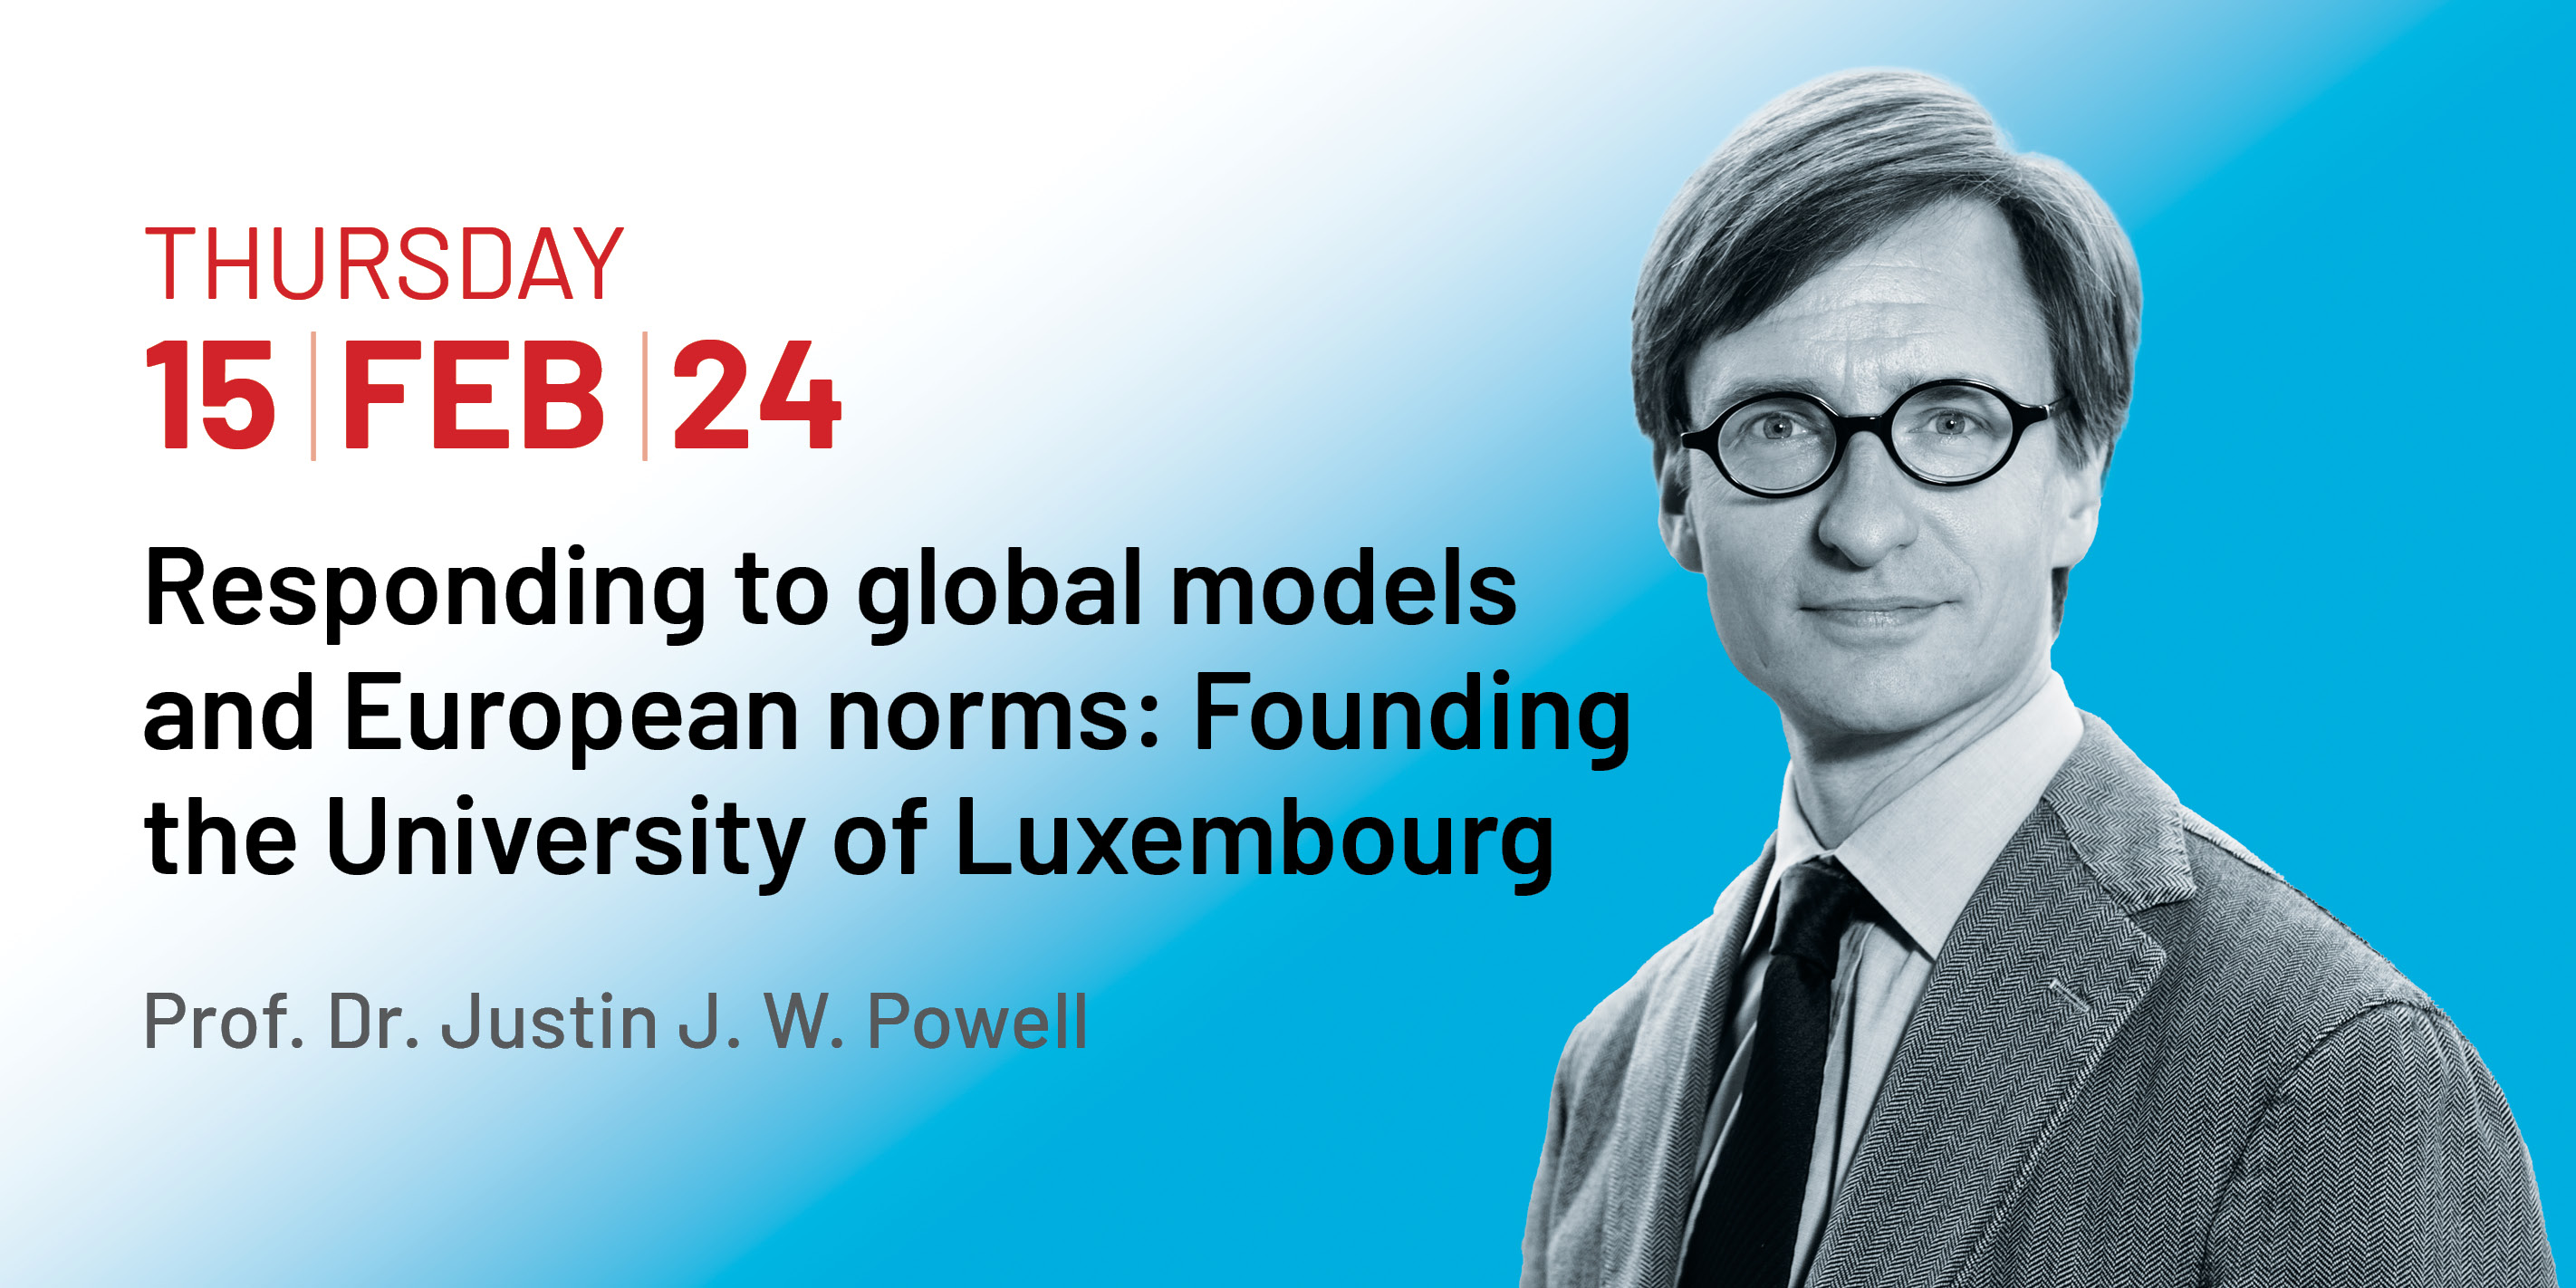 "Founding the University of Luxembourg" - Conference in English